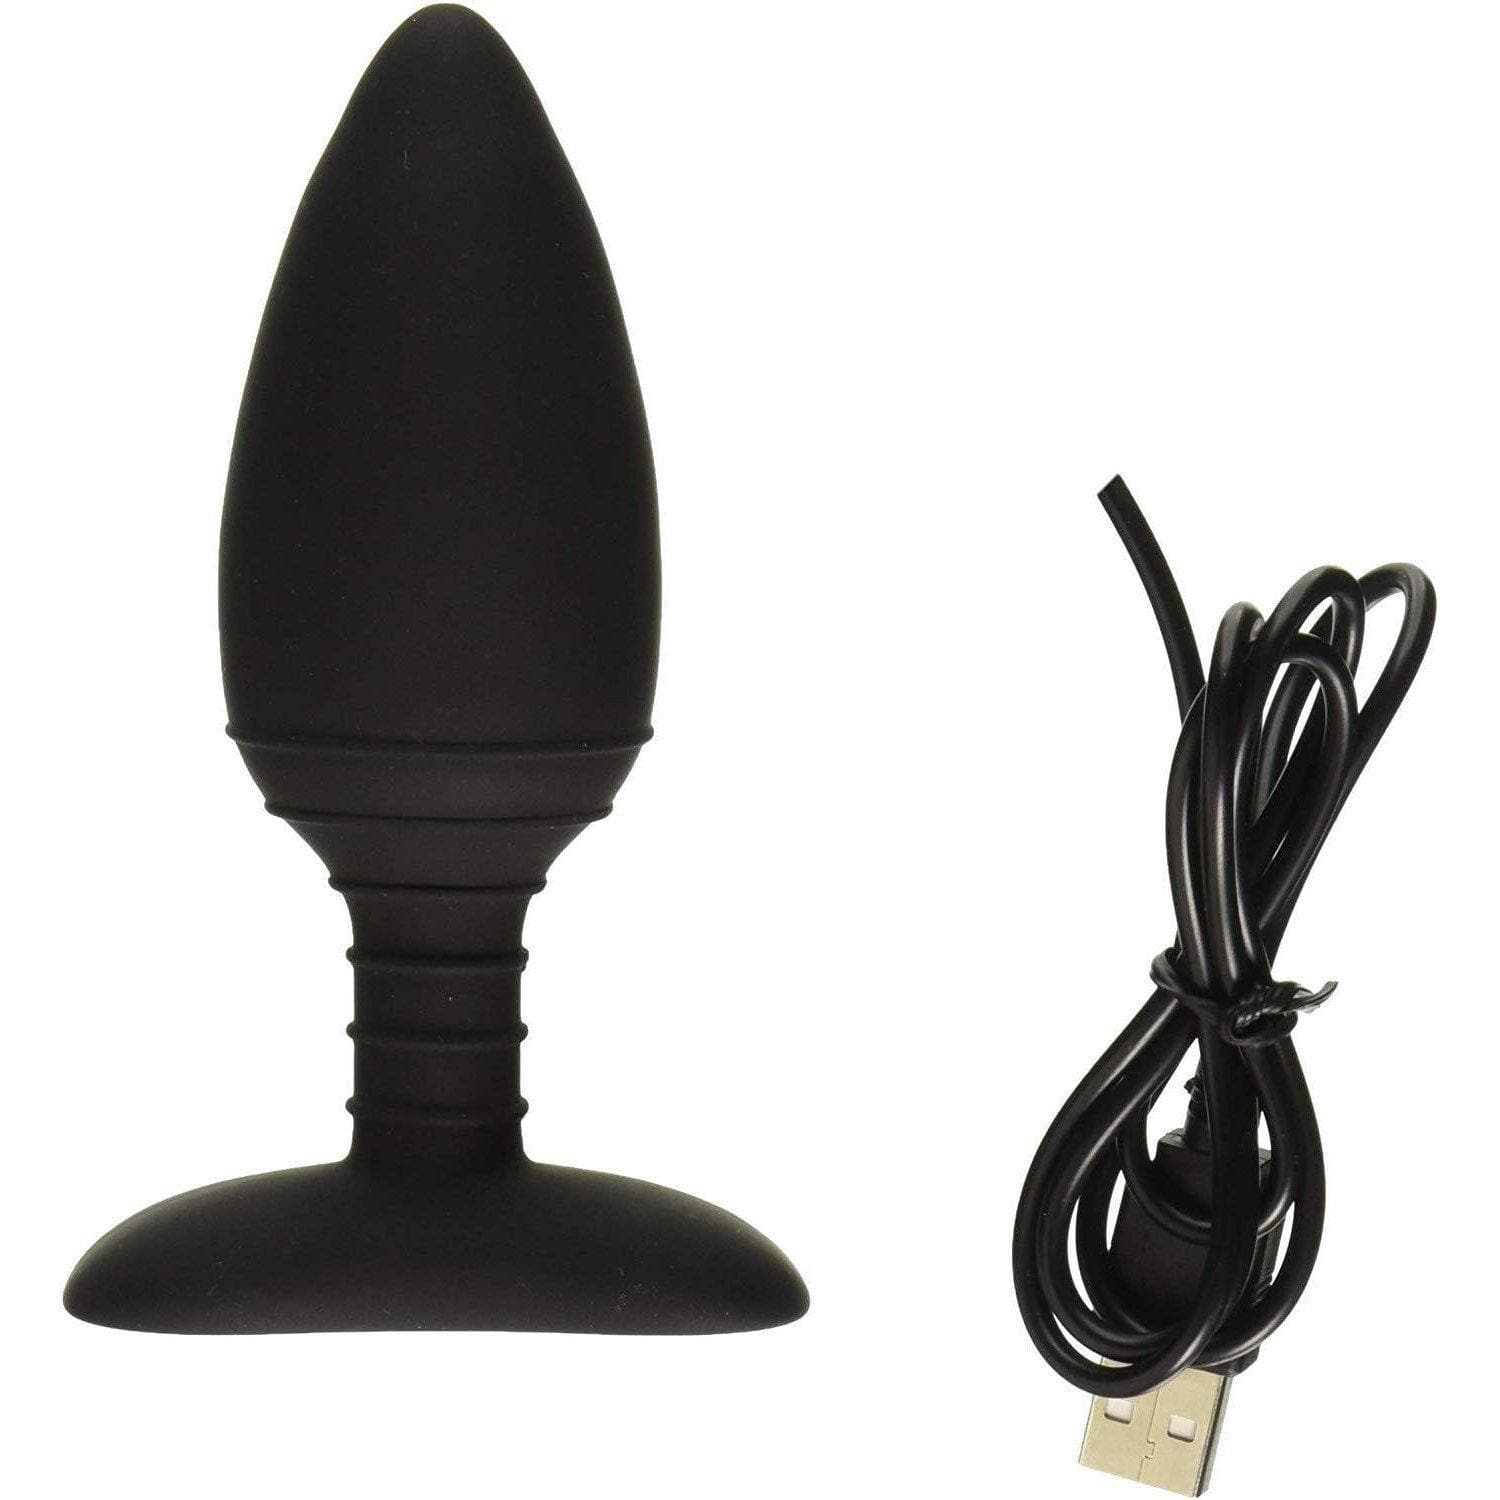 Commander Beginner's 3 Function Rechargeable Vibrating Heat Up Butt Plug - Romantic Blessings